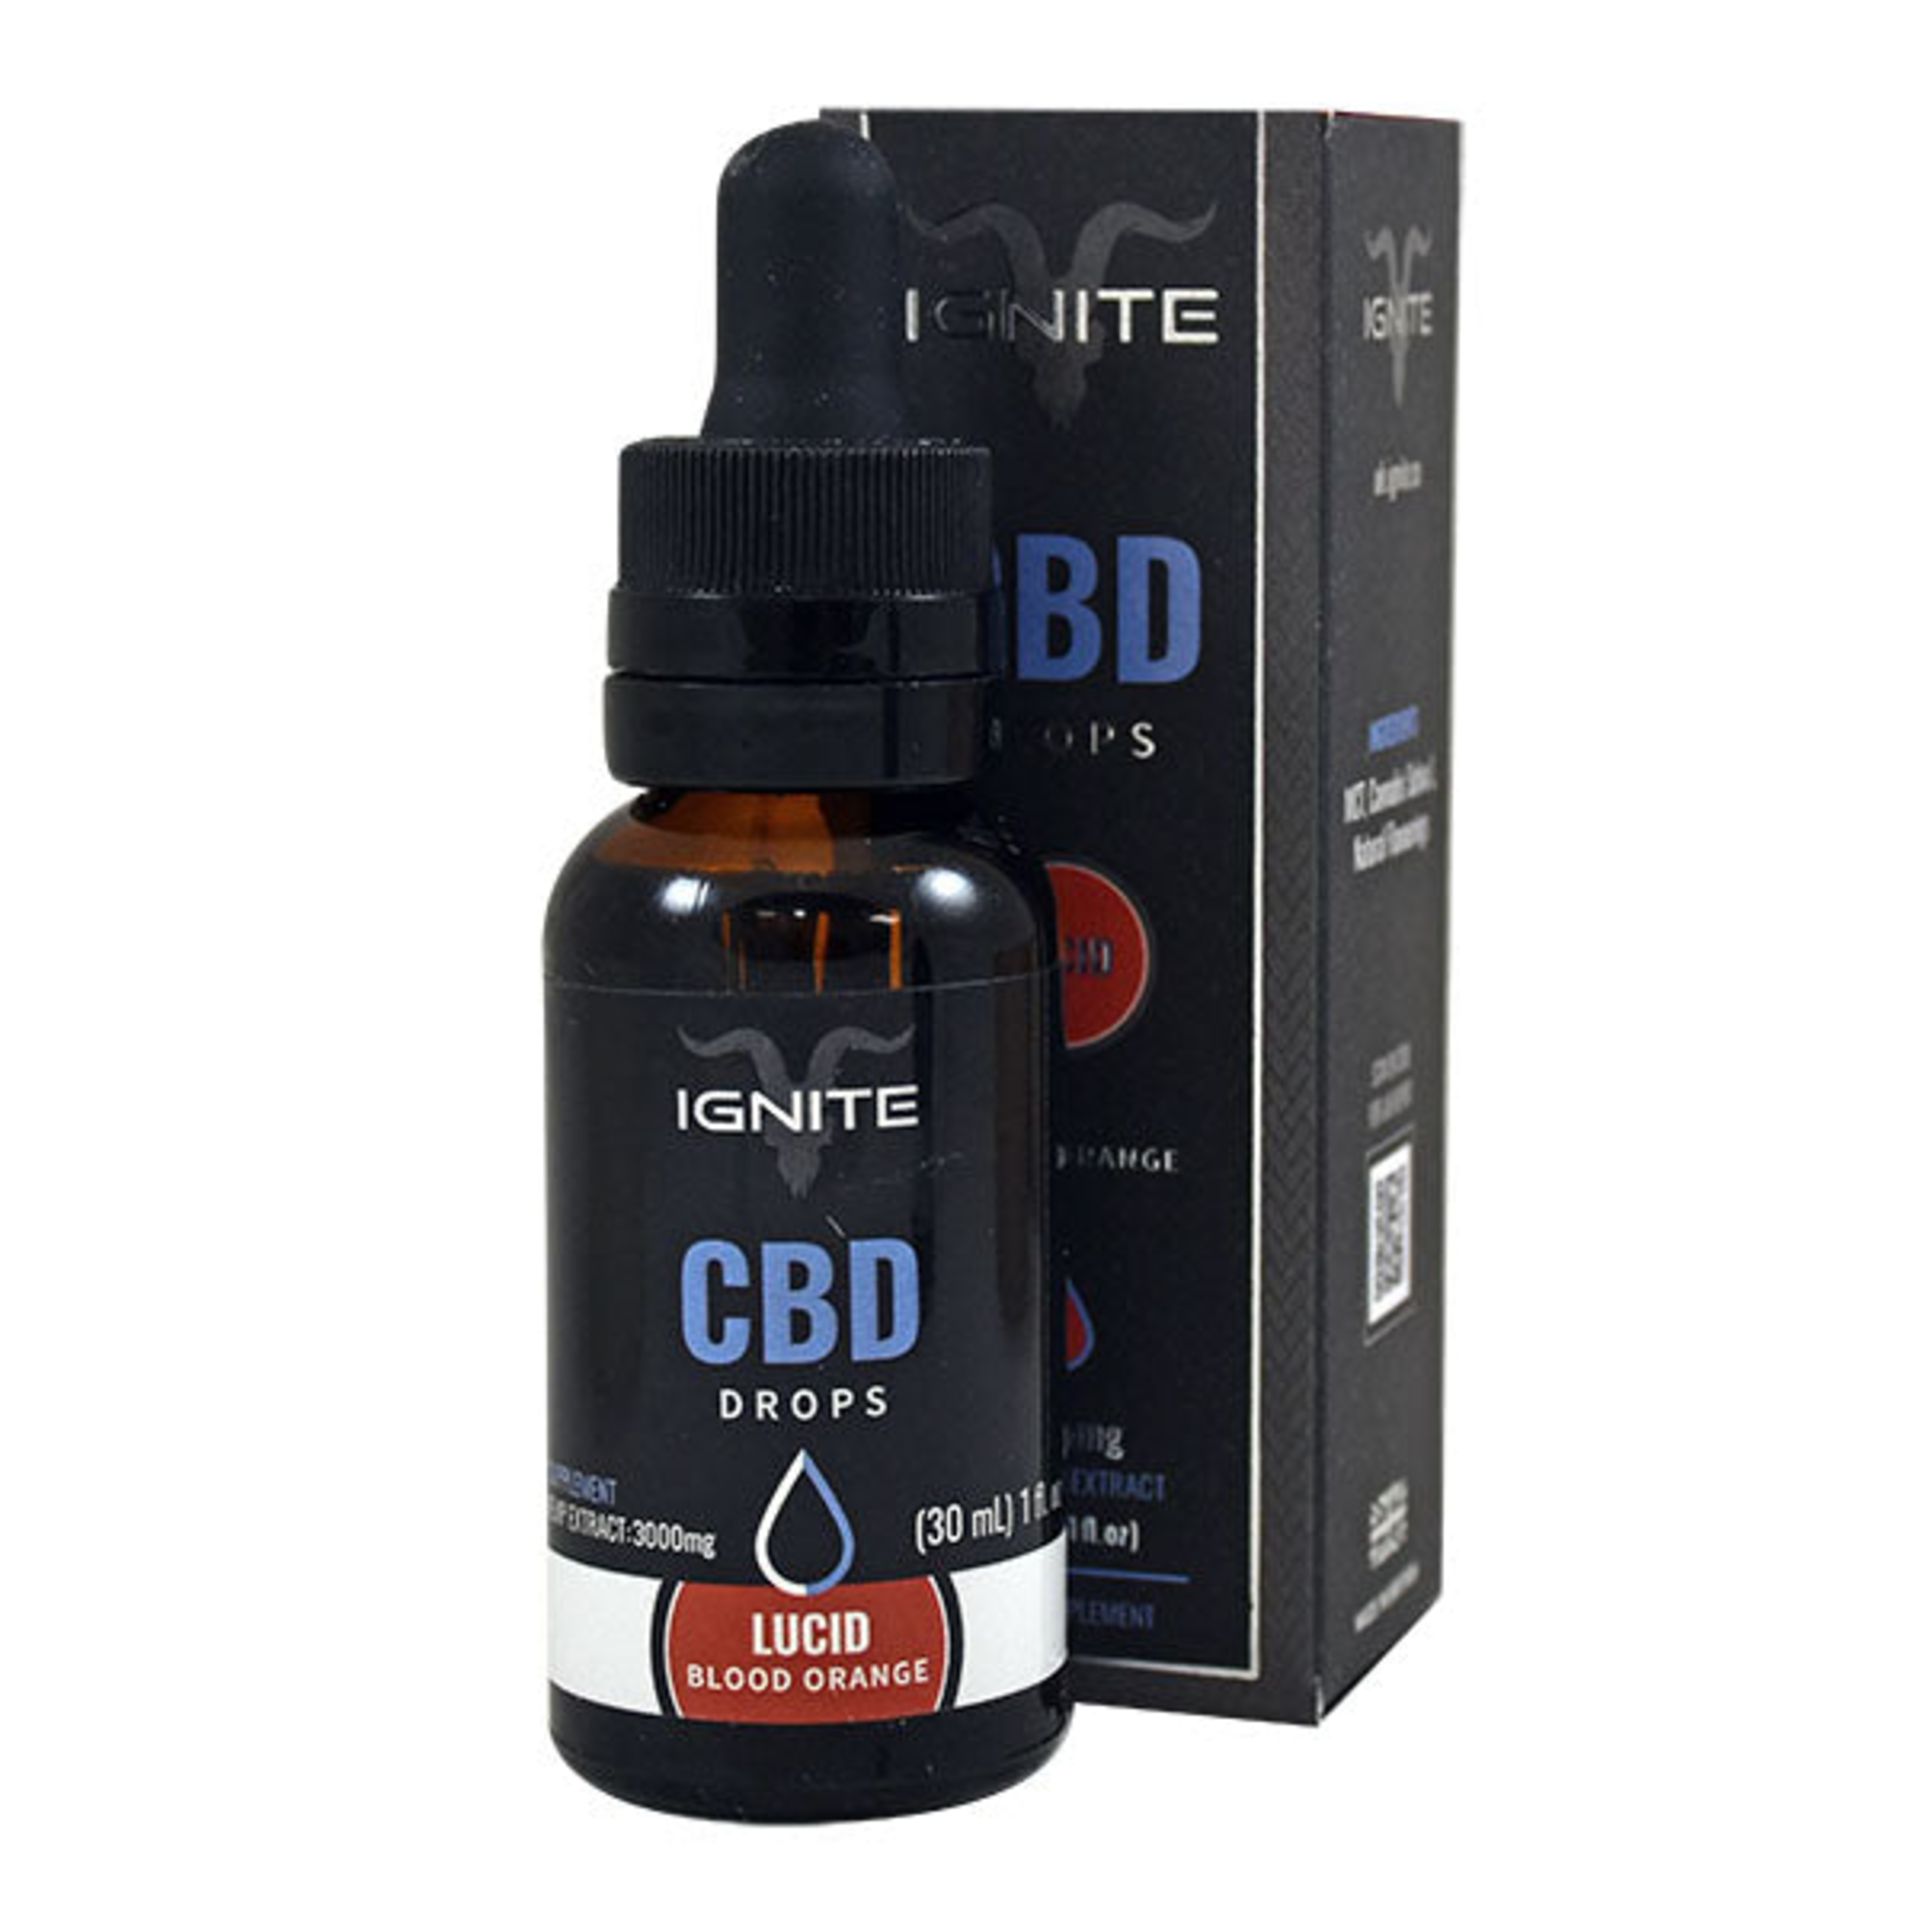 25 New Bottles of CBD Oral Drops - Unflavoured (Lucid) 500mg - RRP £25 each, Total RRP £625 - Image 3 of 4